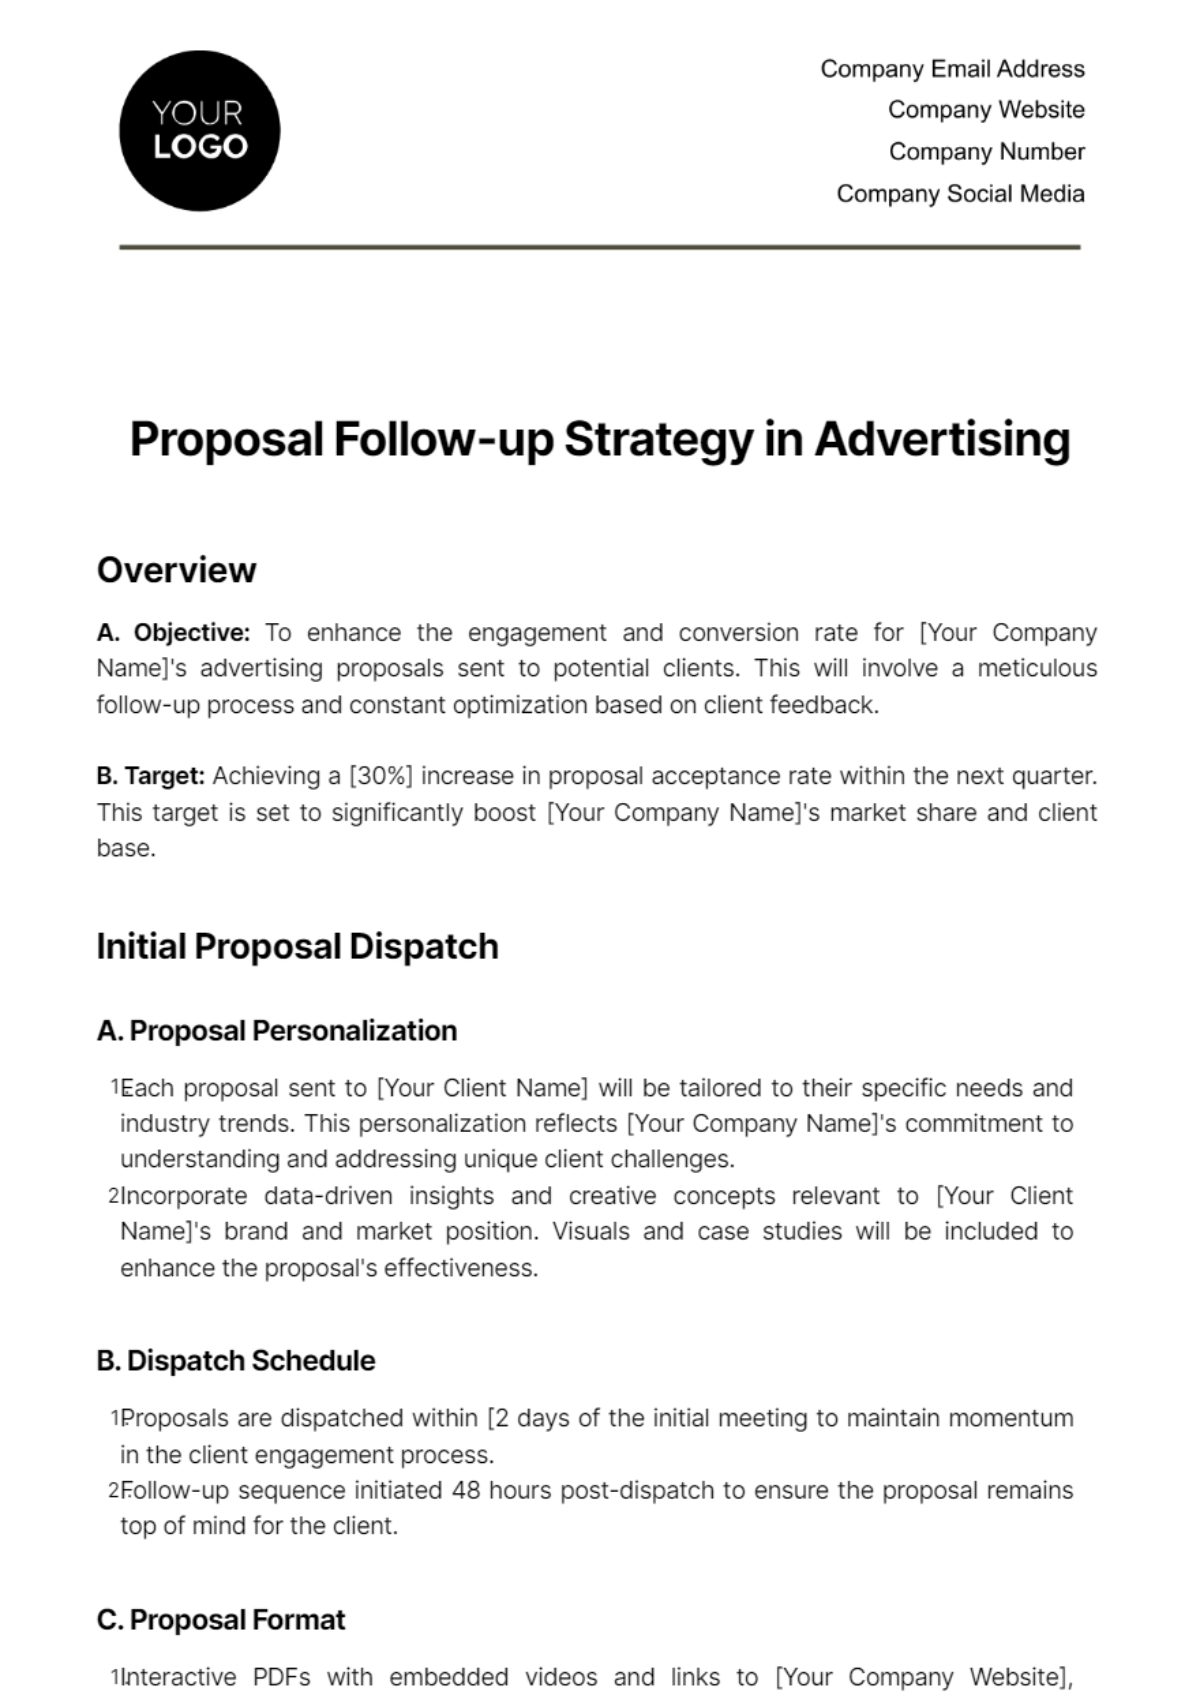 Proposal Follow-Up Strategy in Advertising Template